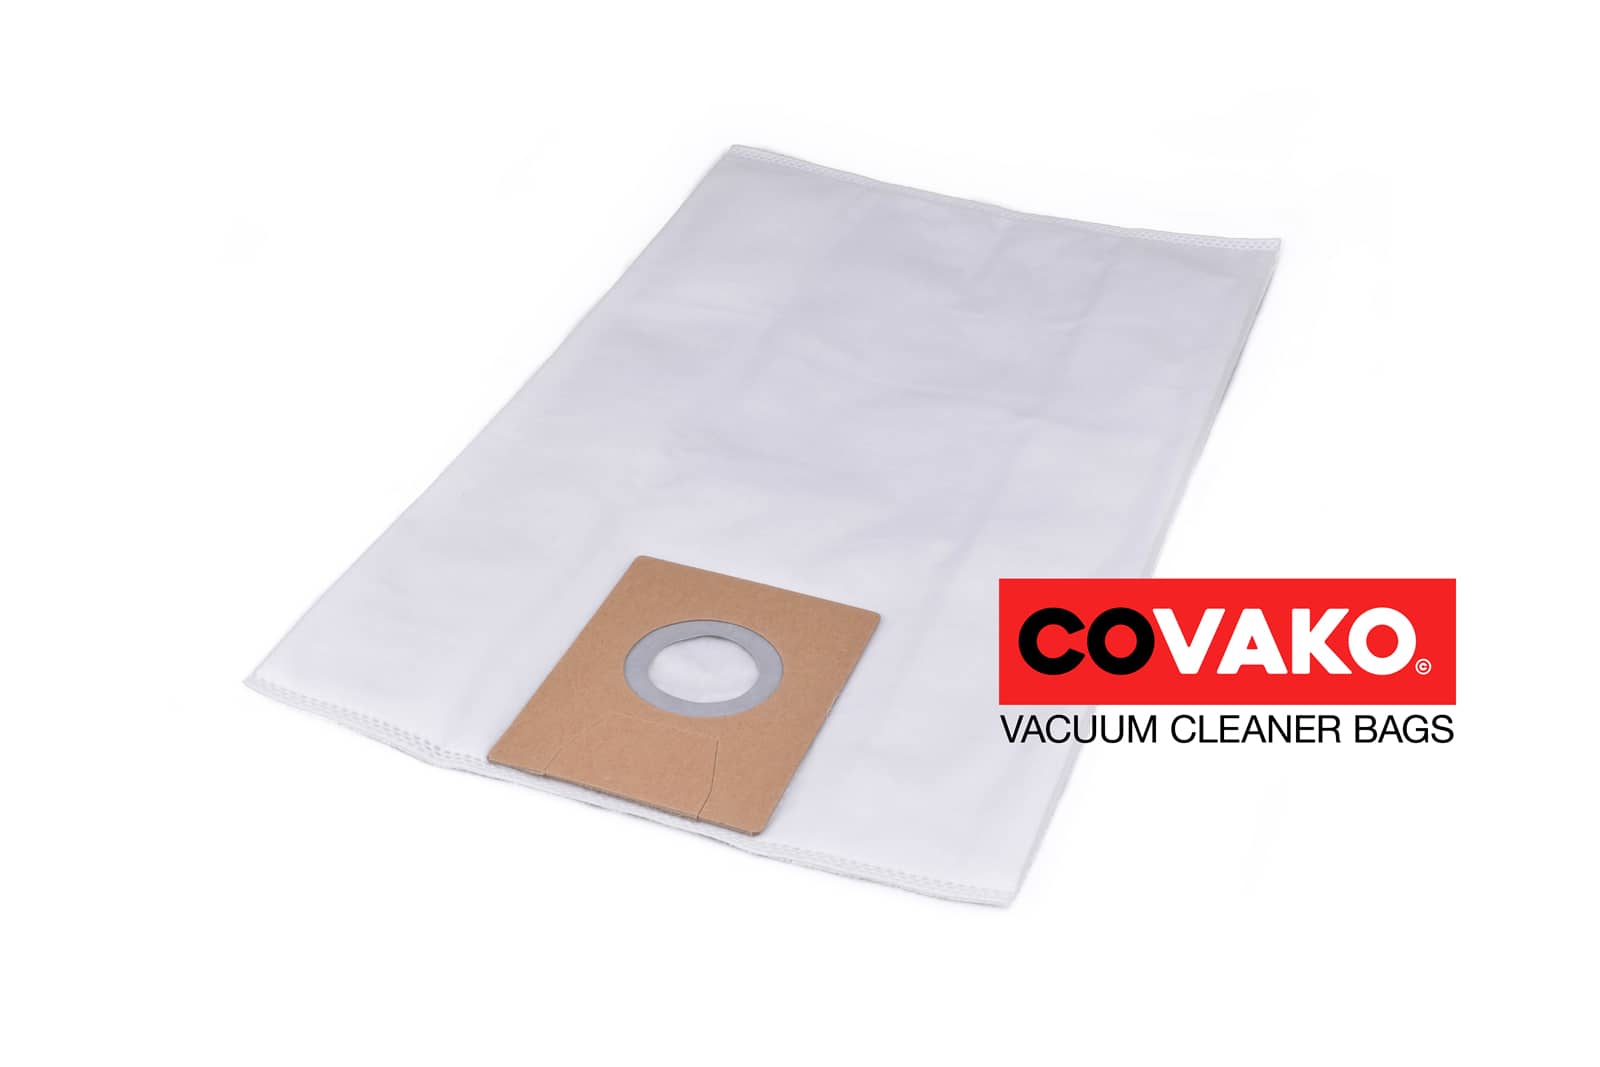 Nilco GS 1600 / Synthesis - Nilco vacuum cleaner bags